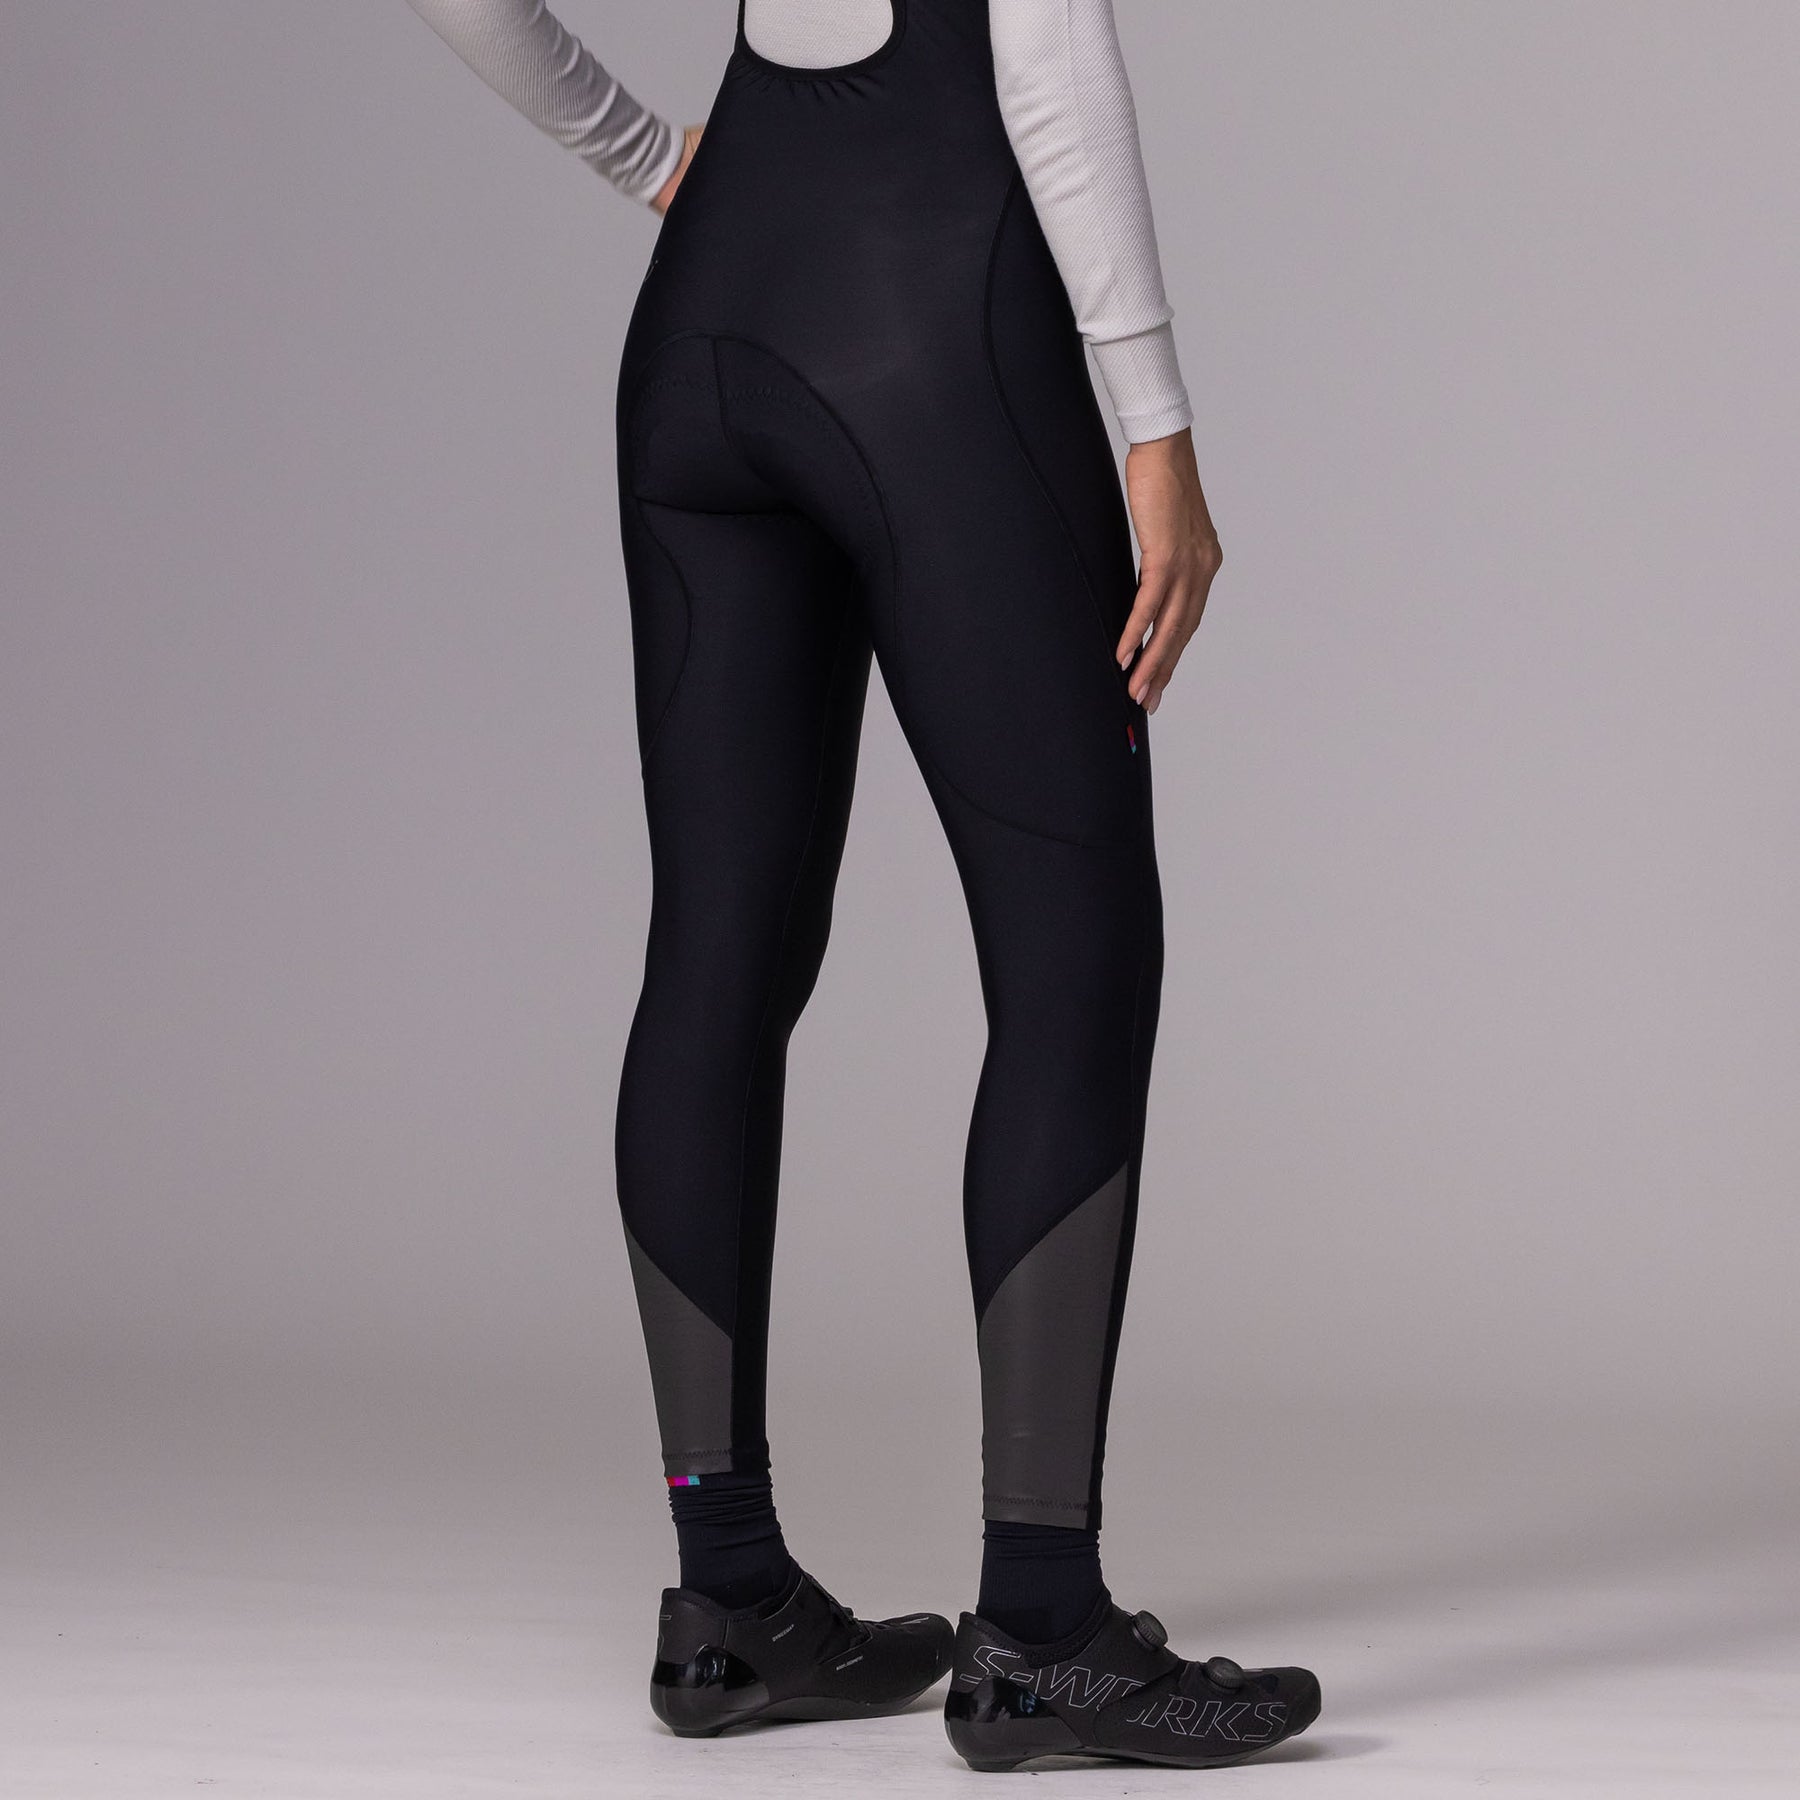 Women's ThermaShell Water-Resistant Bib Tights Black, Buy Women's  ThermaShell Water-Resistant Bib Tights Black here